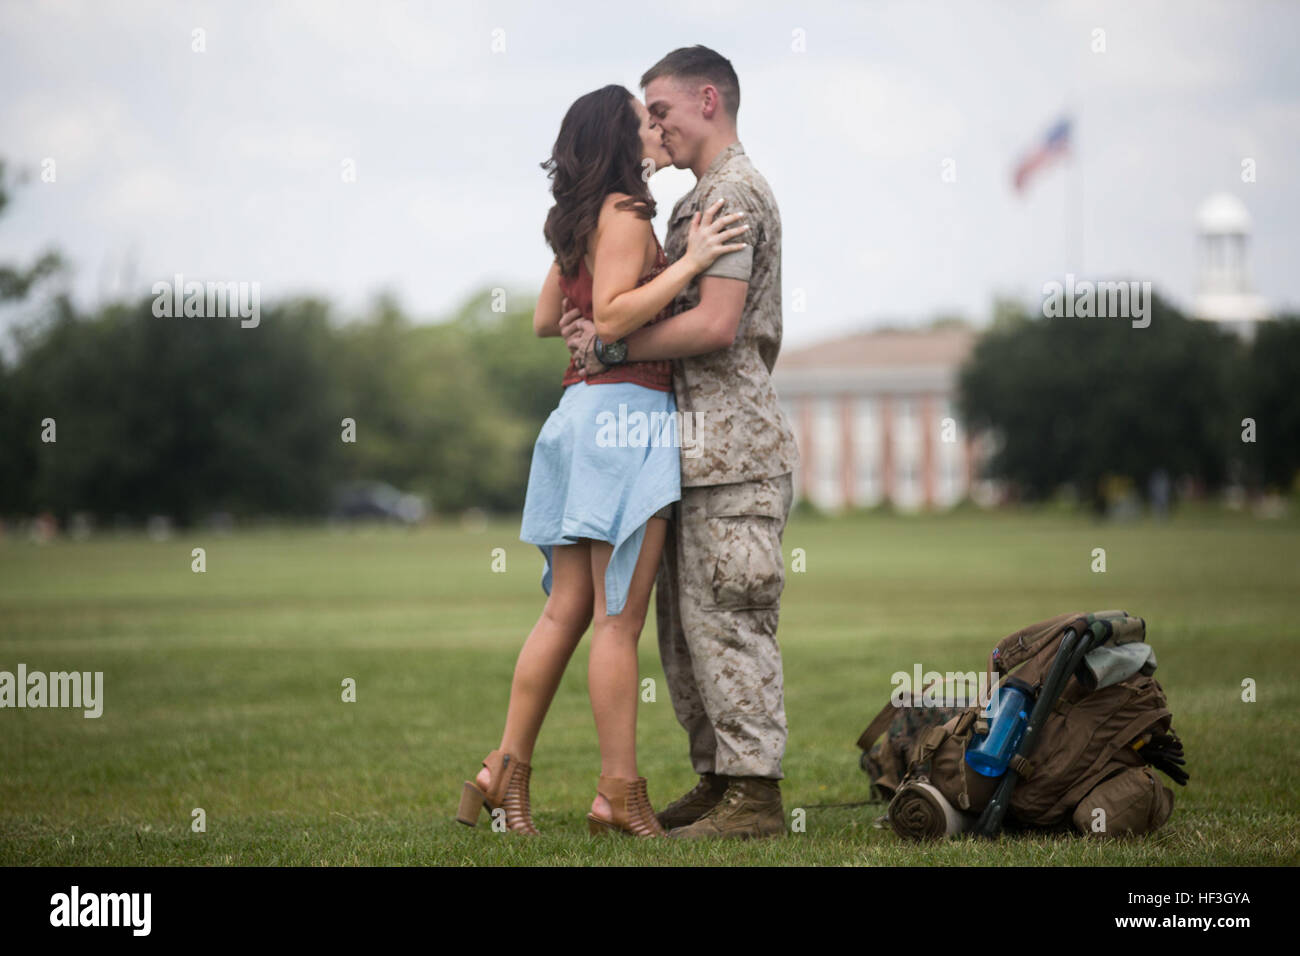 Lance Cpl. David Sellers, a refrigeration mechanic with the 24th Marine Expeditionary Unit, embraces his wife with a kiss during the Command Element’s homecoming at Camp Lejeune, N.C., July 17, 2015. Marines and Sailors of the 24th MEU were embarked on the ships of the Iwo Jima Amphibious Ready Group and supported operations in the U.S. 5th and 6th Fleet area of operations. They also took part in numerous theater security cooperation exercises and training with allied partners such as Djibouti, Italy, Oman, Spain, France, Jordan, Israel, United Arab Emirates, Bahrain, Greece, Kuwait, and Saudi Stock Photo